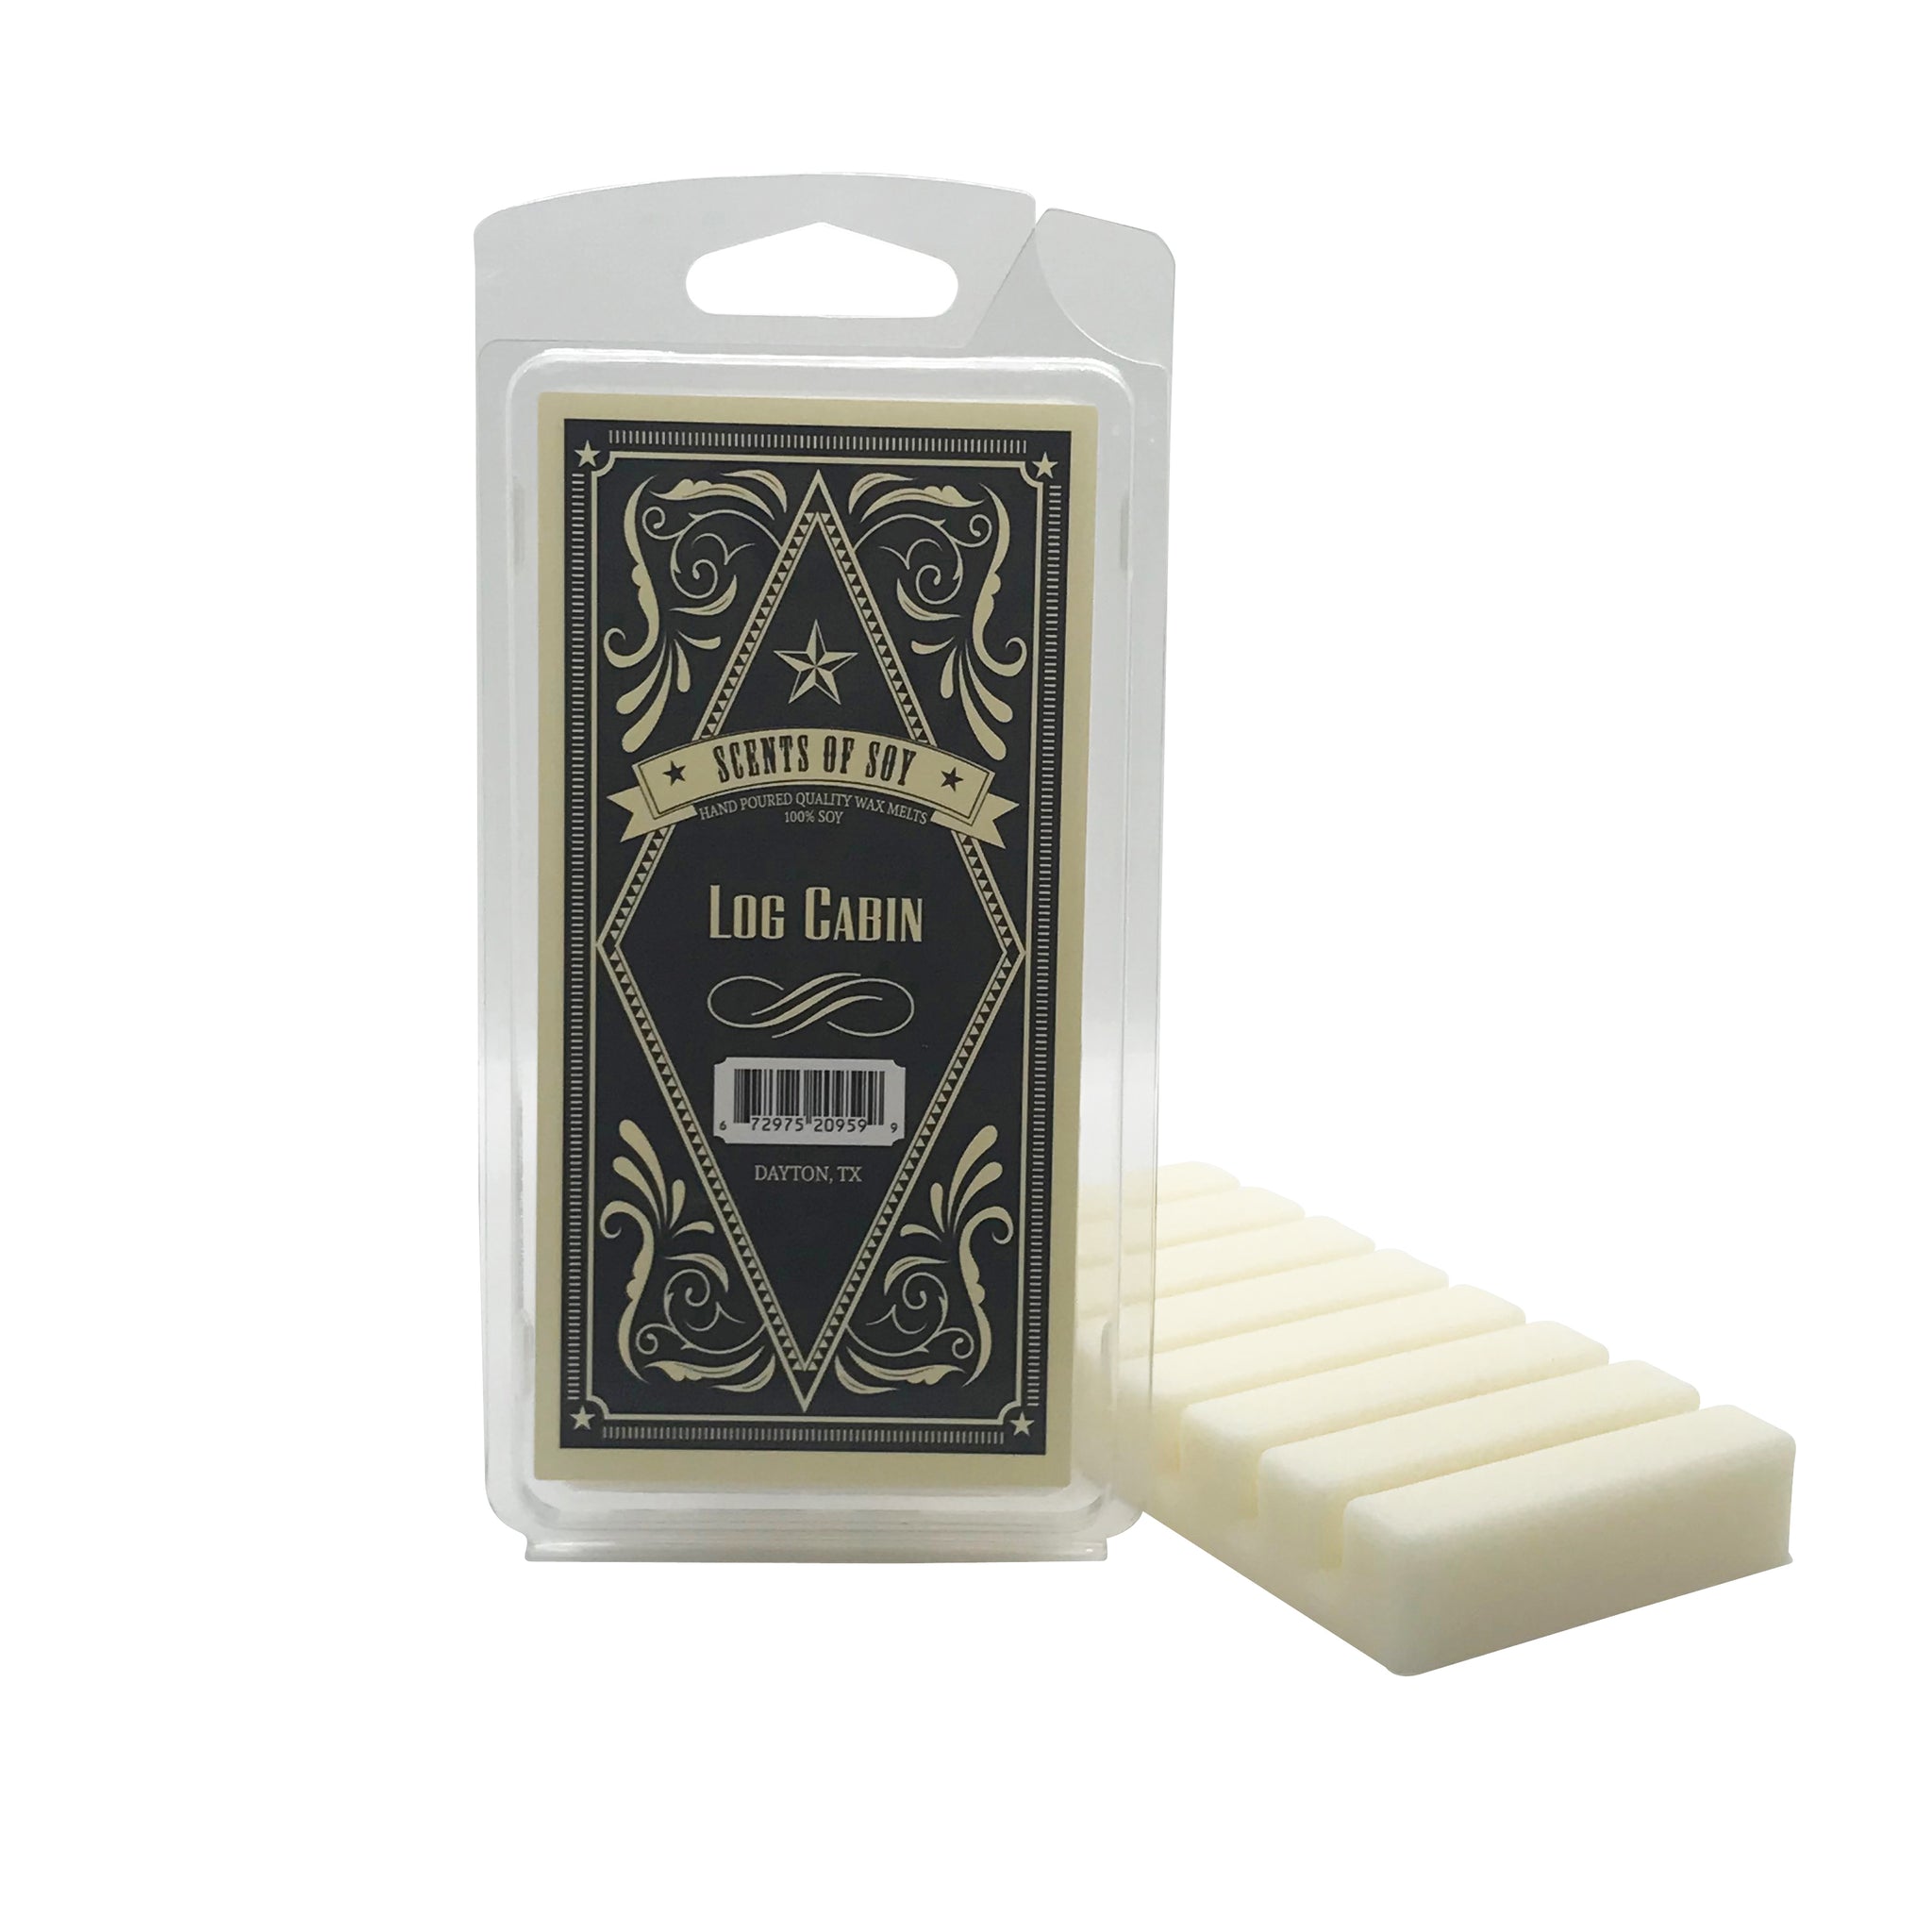 Coffee-ology Wax Melts | Suite 1124